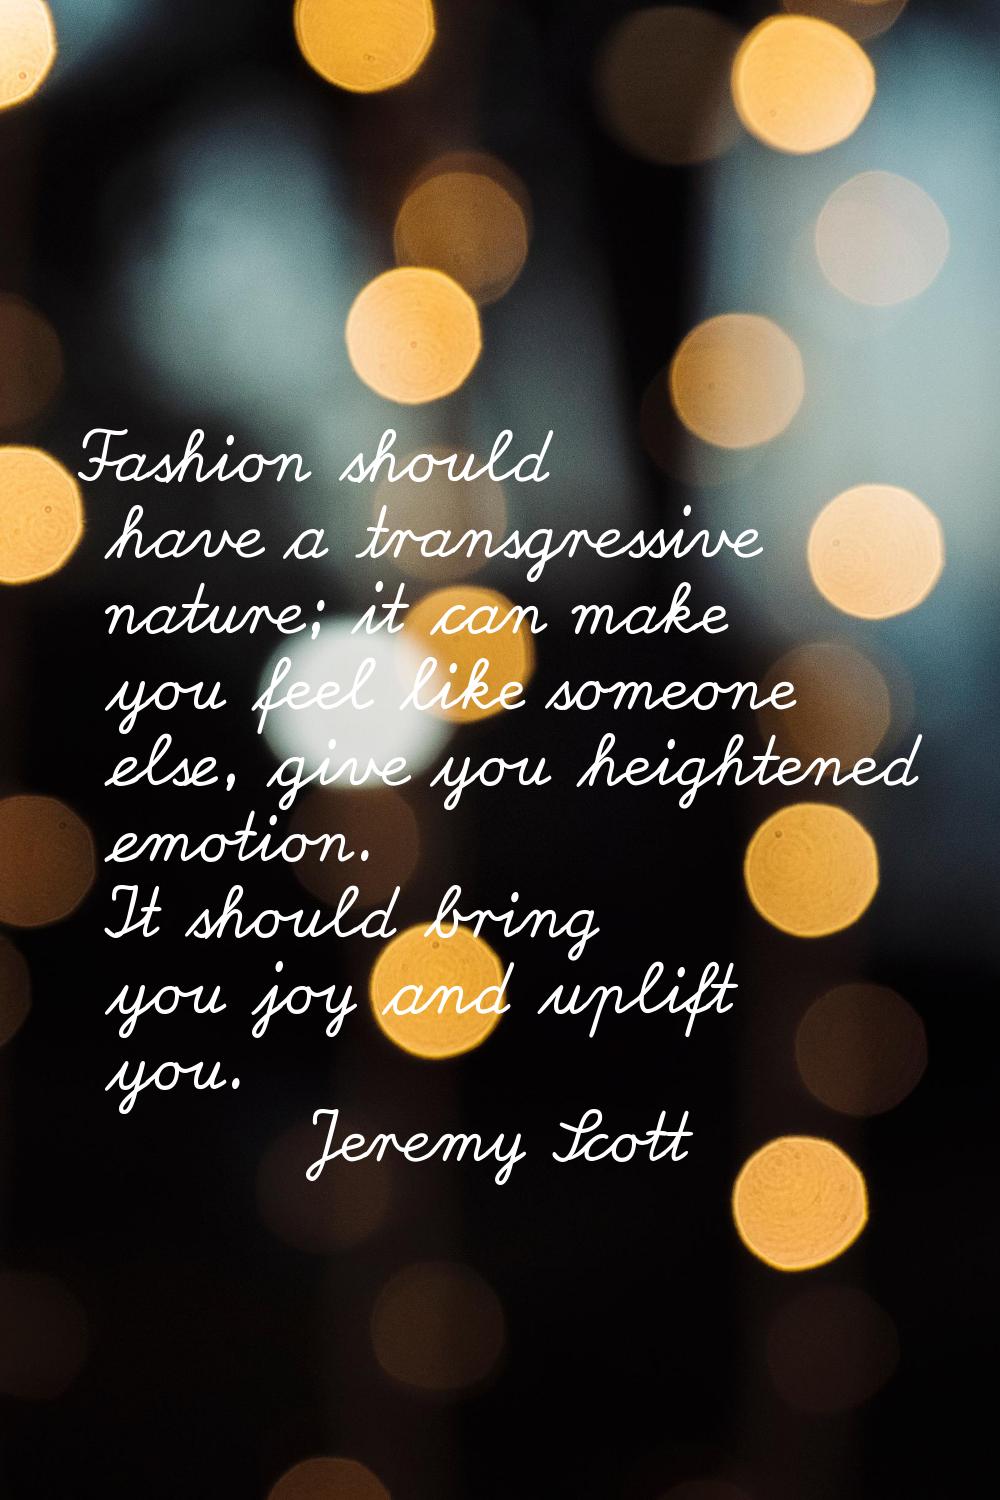 Fashion should have a transgressive nature; it can make you feel like someone else, give you height